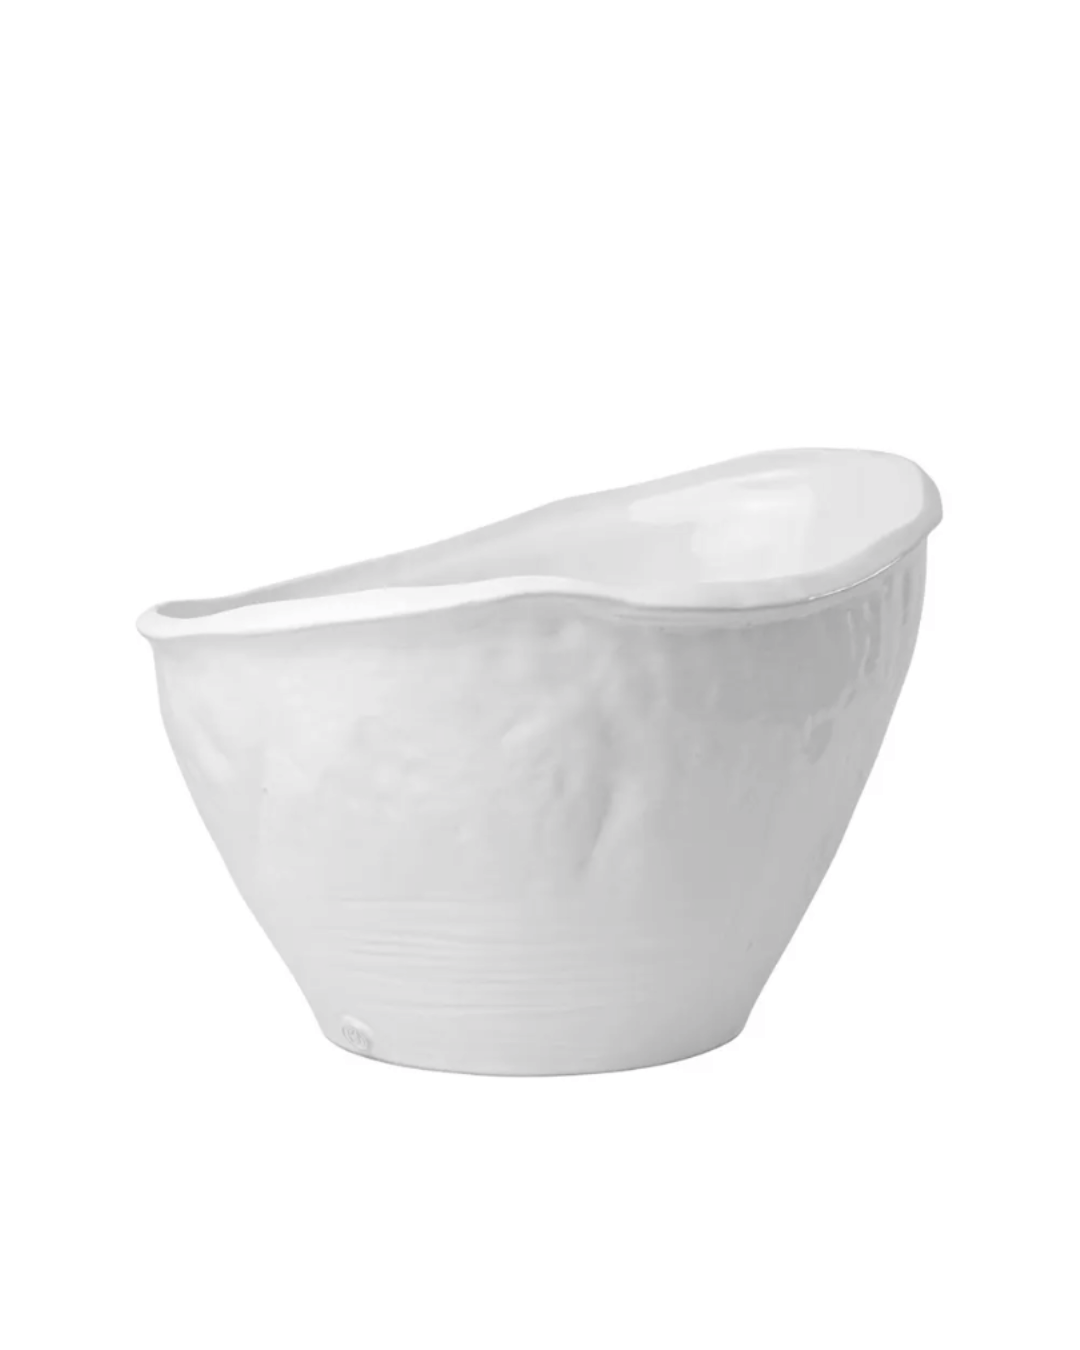 A Montes Doggett Ice Bucket No. 775 with a pouring spout, set against a plain white background. The ice bucket's surface, reminiscent of the subtle elegance found in Scottsdale Arizona homes, has a textured finish.